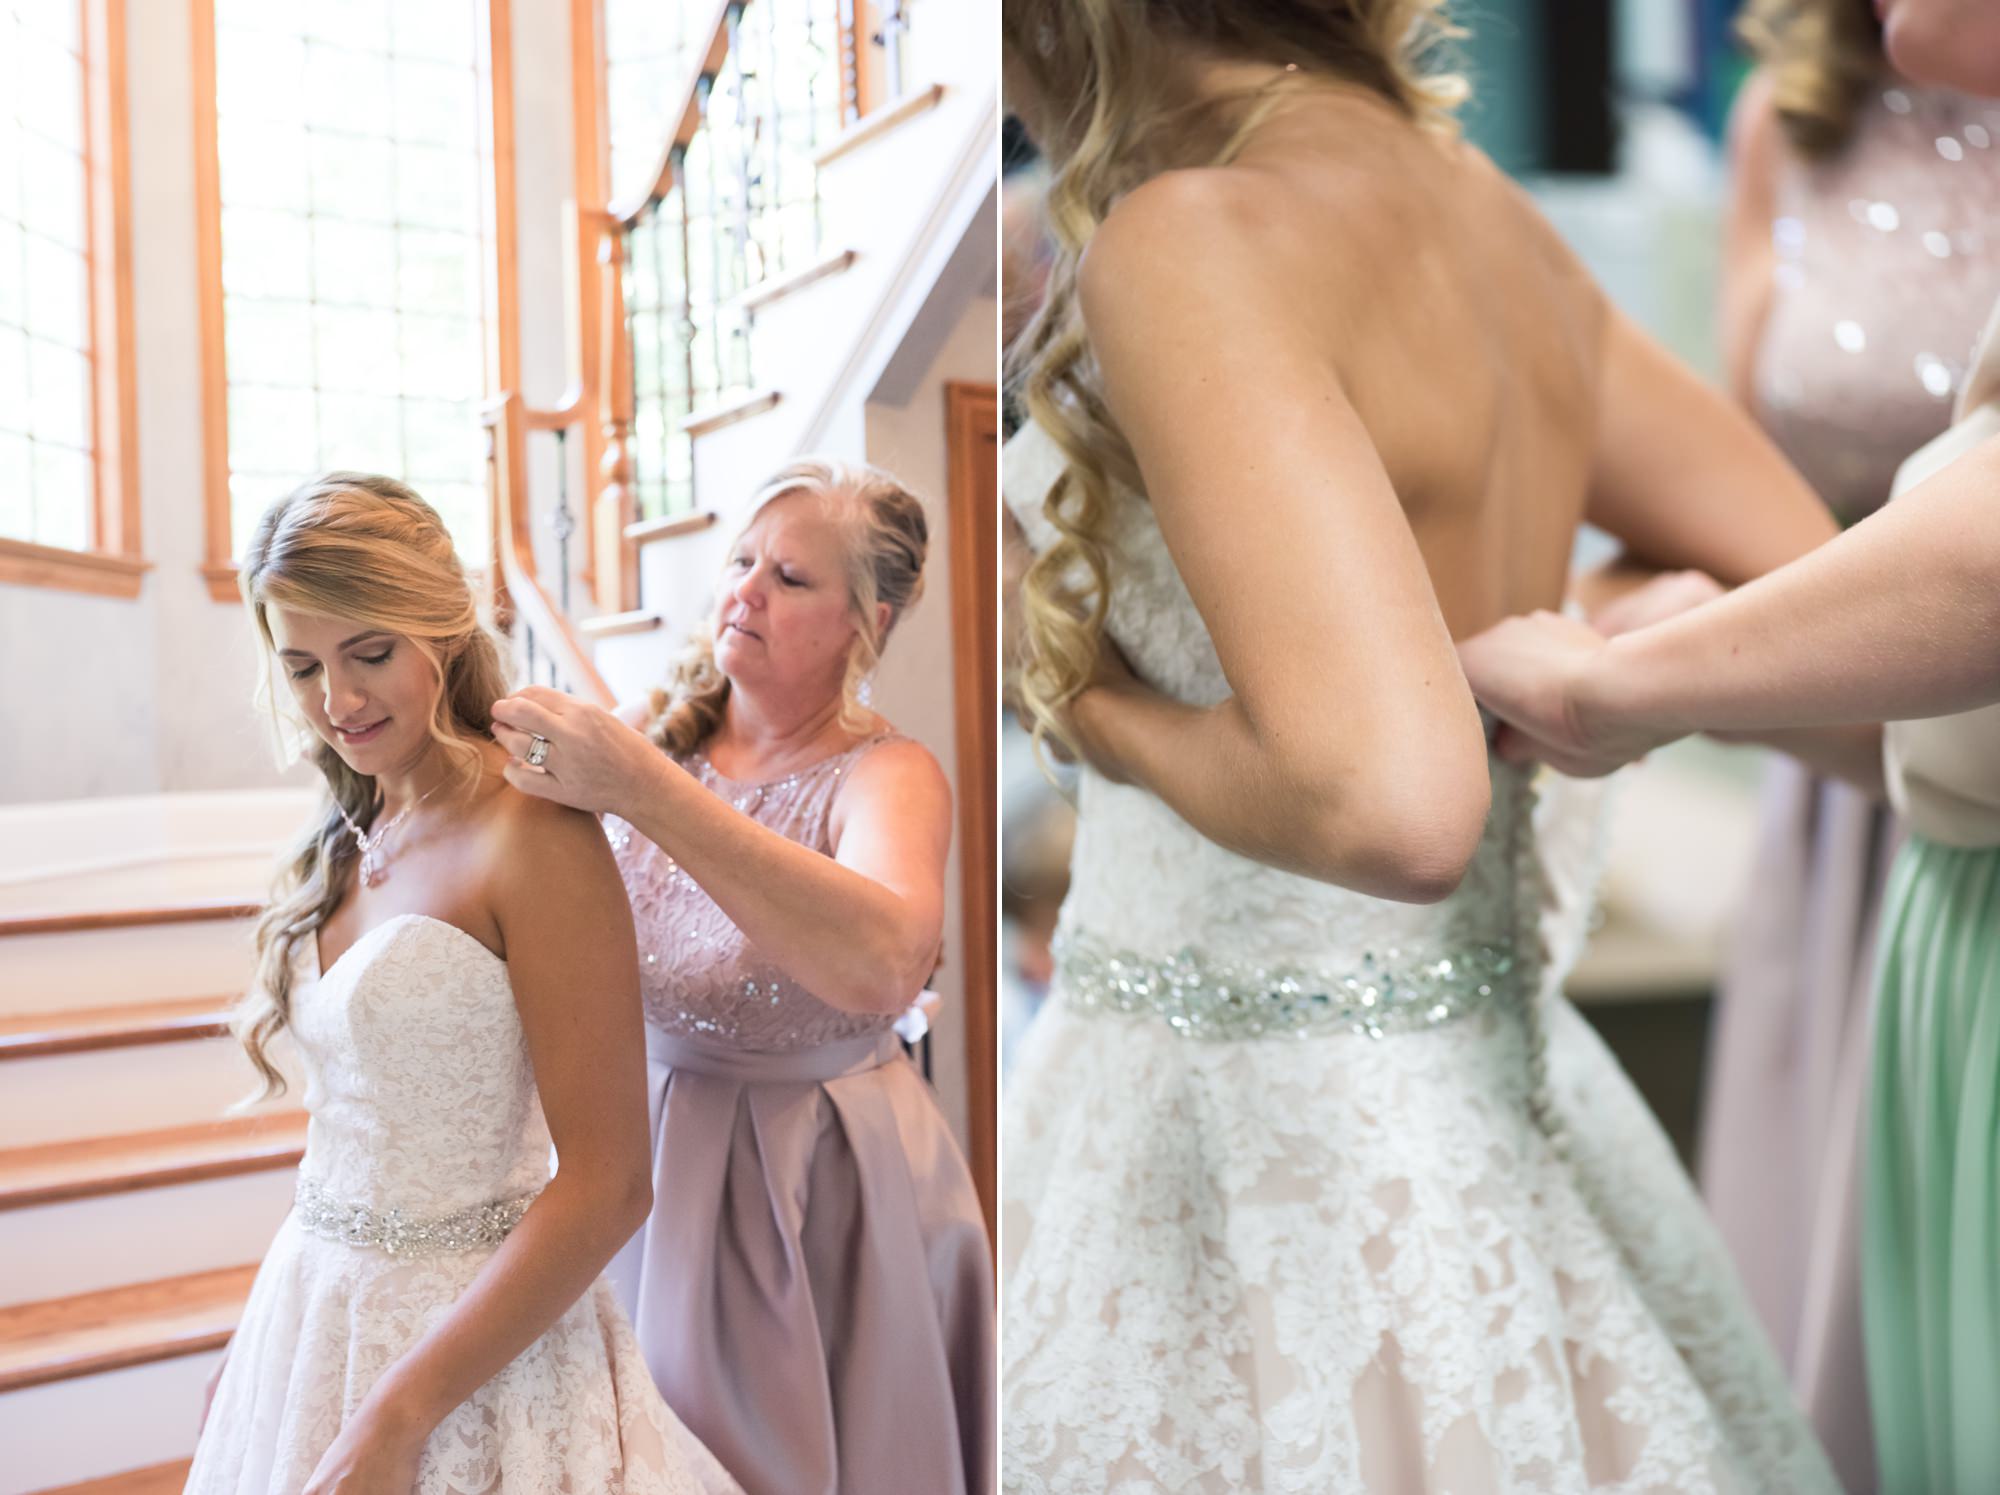 Kelly + Mike | Charlotte Wedding Photographer | A Bottle Factory wedding || Anna Wisjo Photography